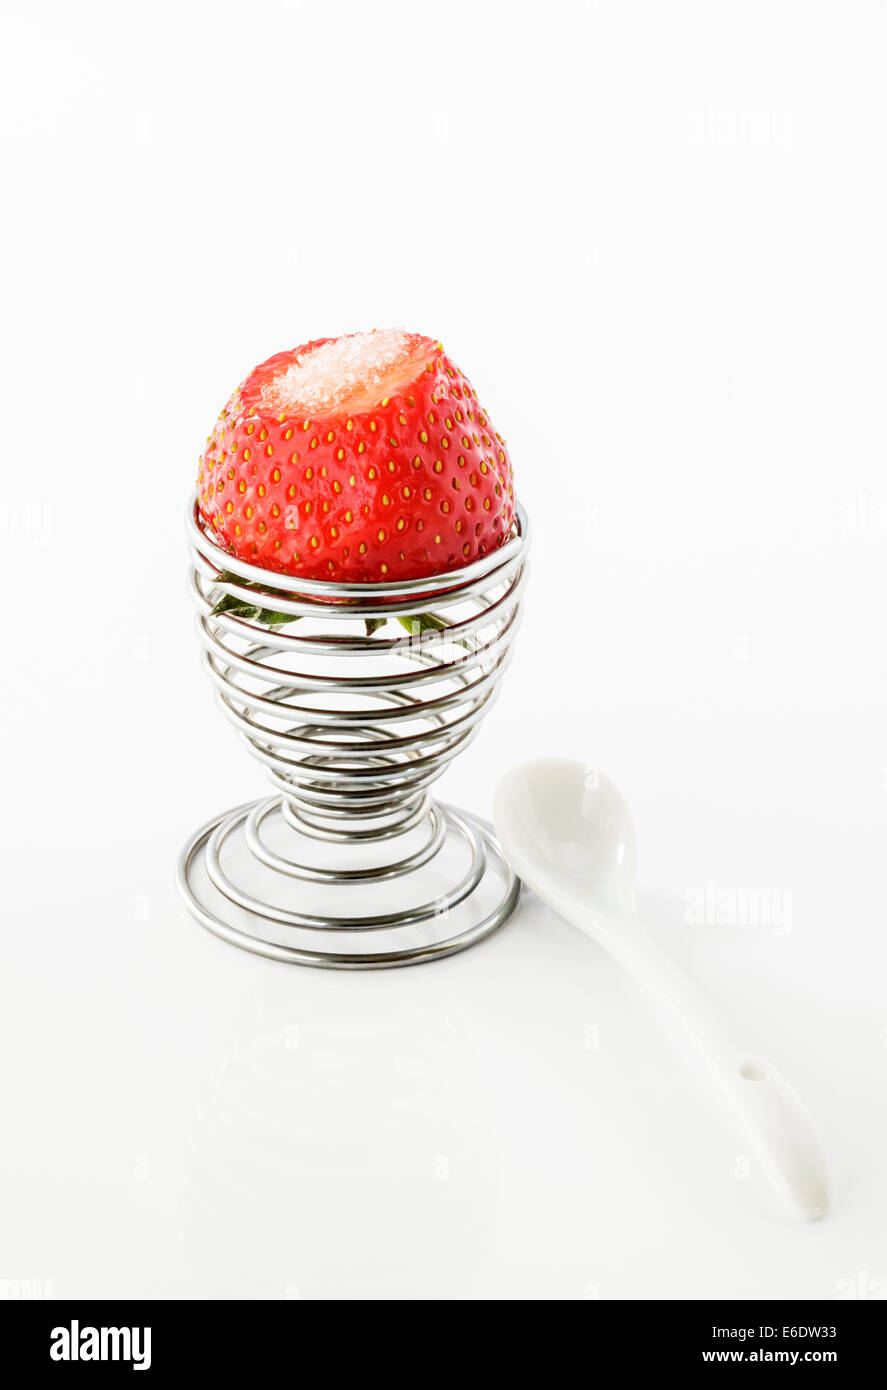 Fresh Strawberry in a egg cup Stock Photo